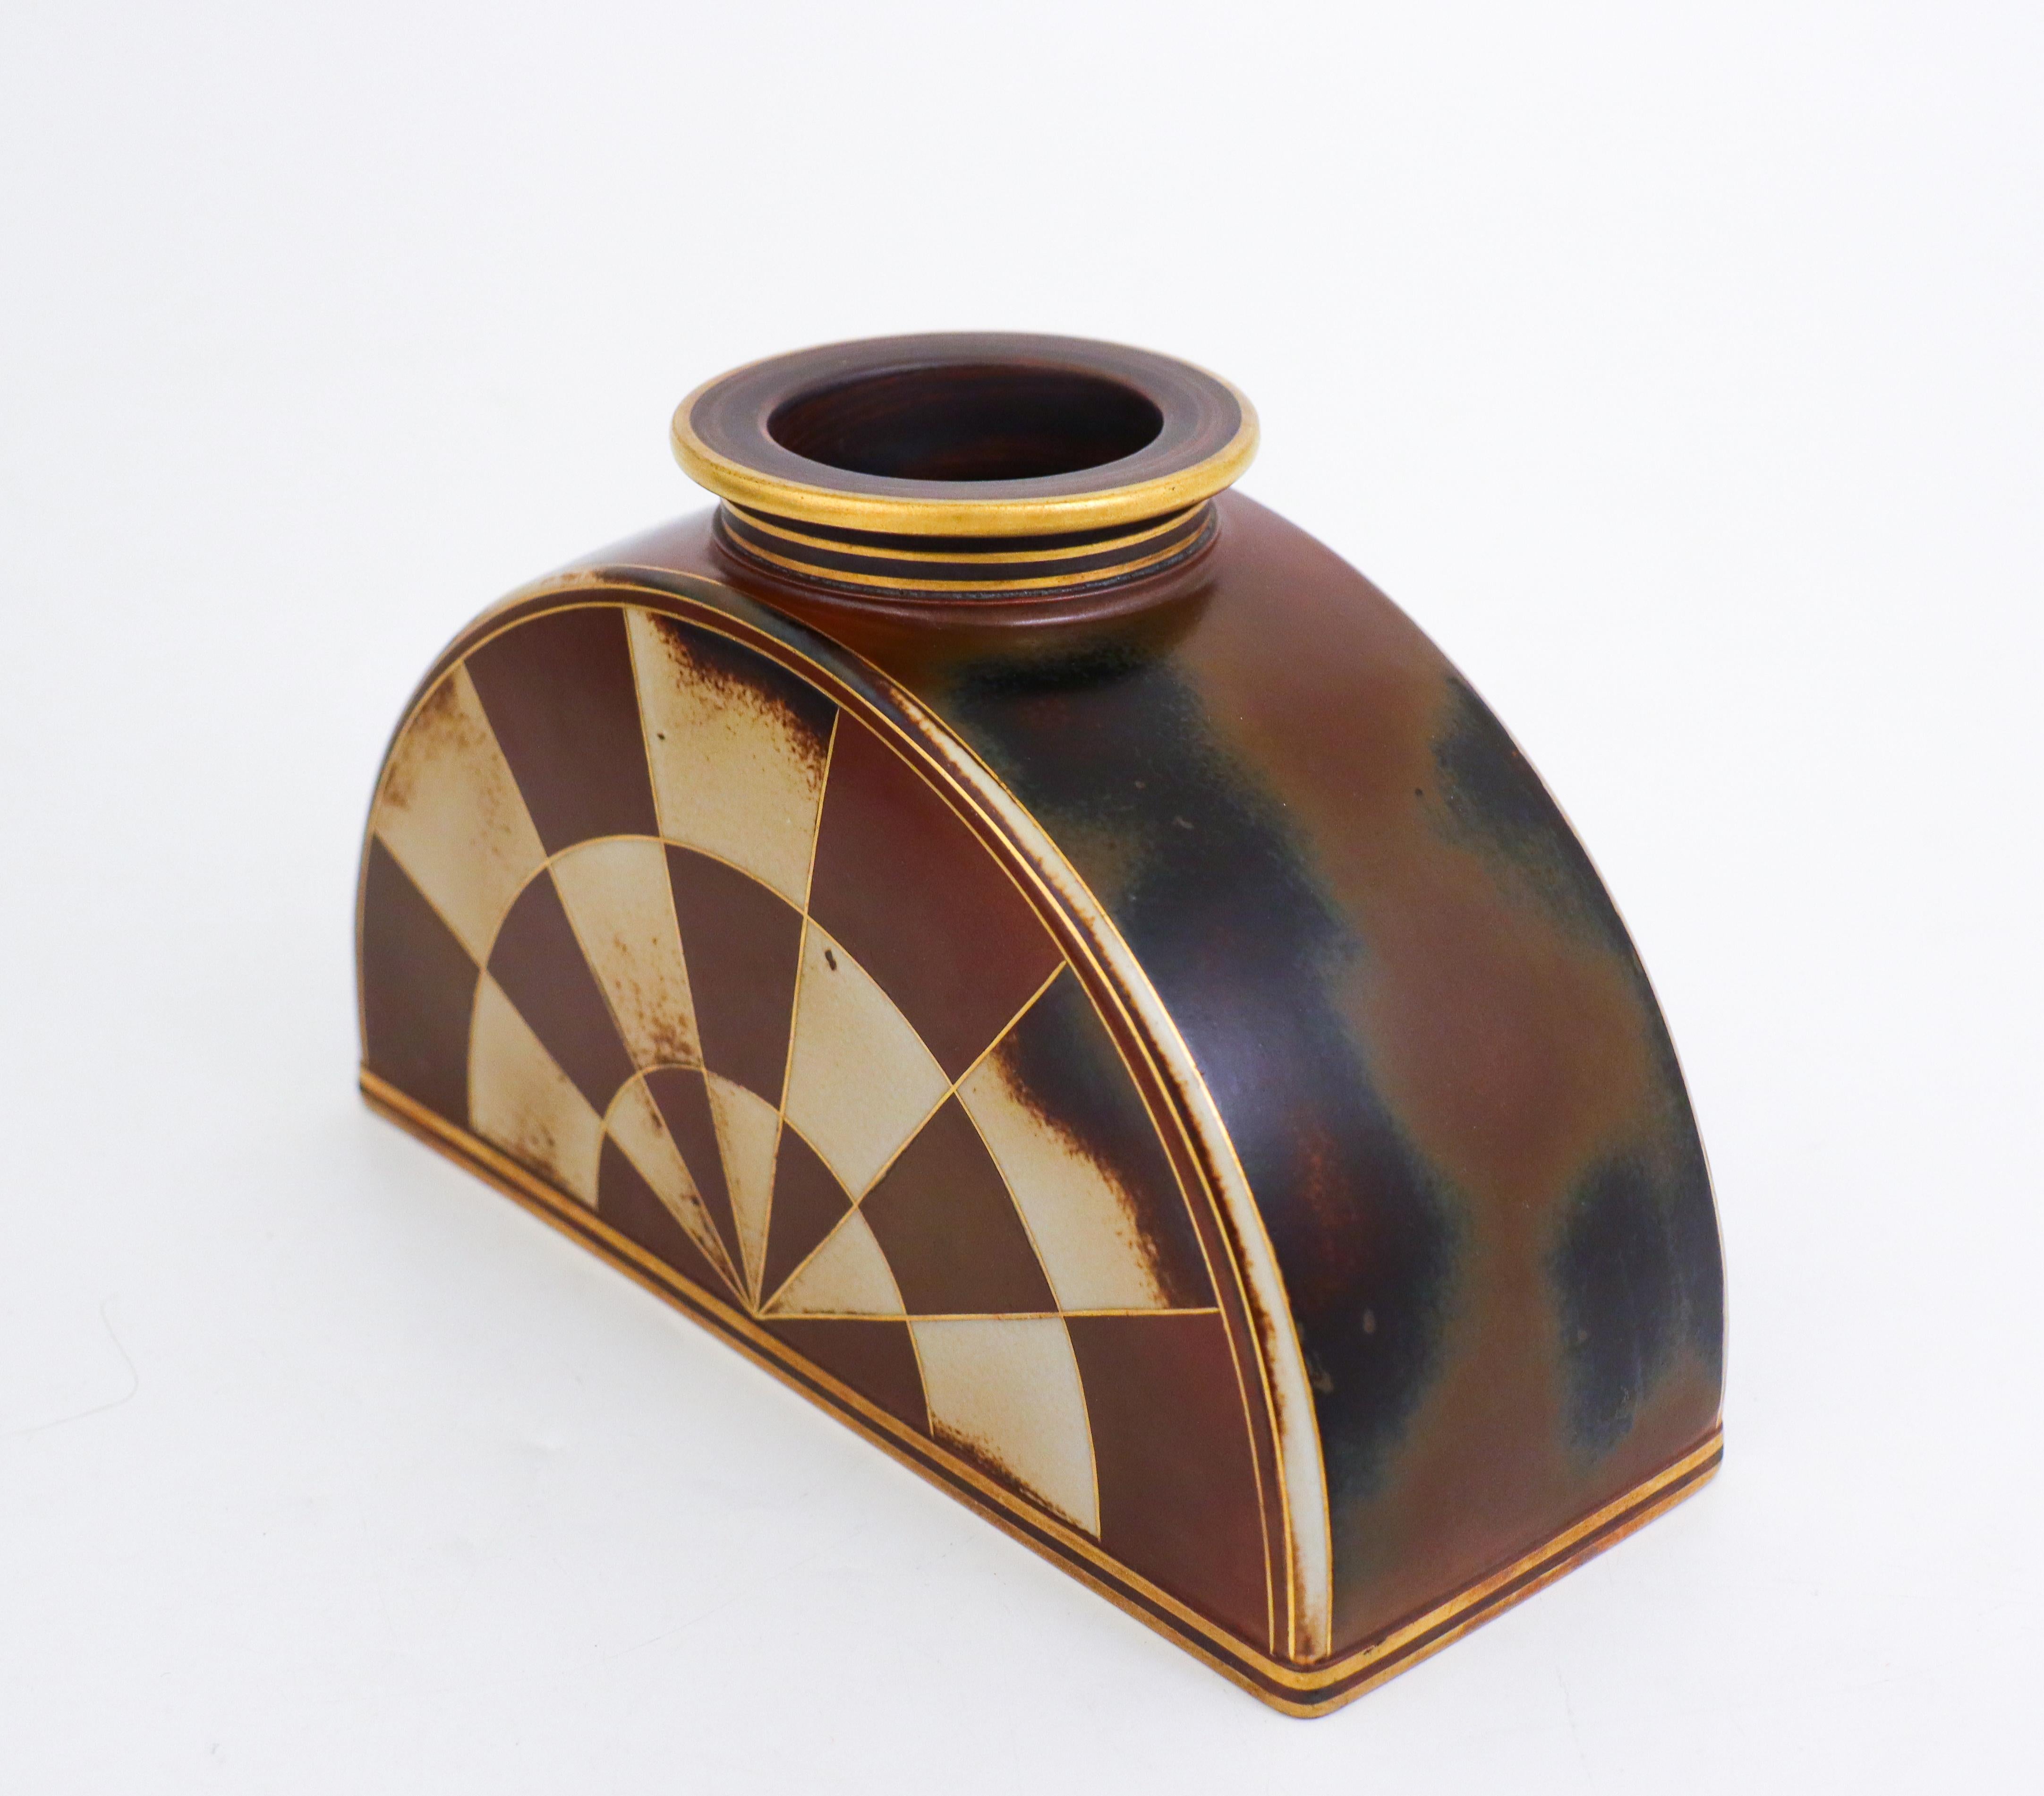 A rare vase designed by Gunnar Nylund at Rörstrand, the vase is in Flambé-technique and designed in the 1940s. The vase is 12,5 cm high and it is in excellent condition. 

Gunnar Nylund is born in Paris but moved to Denmark and started to work at